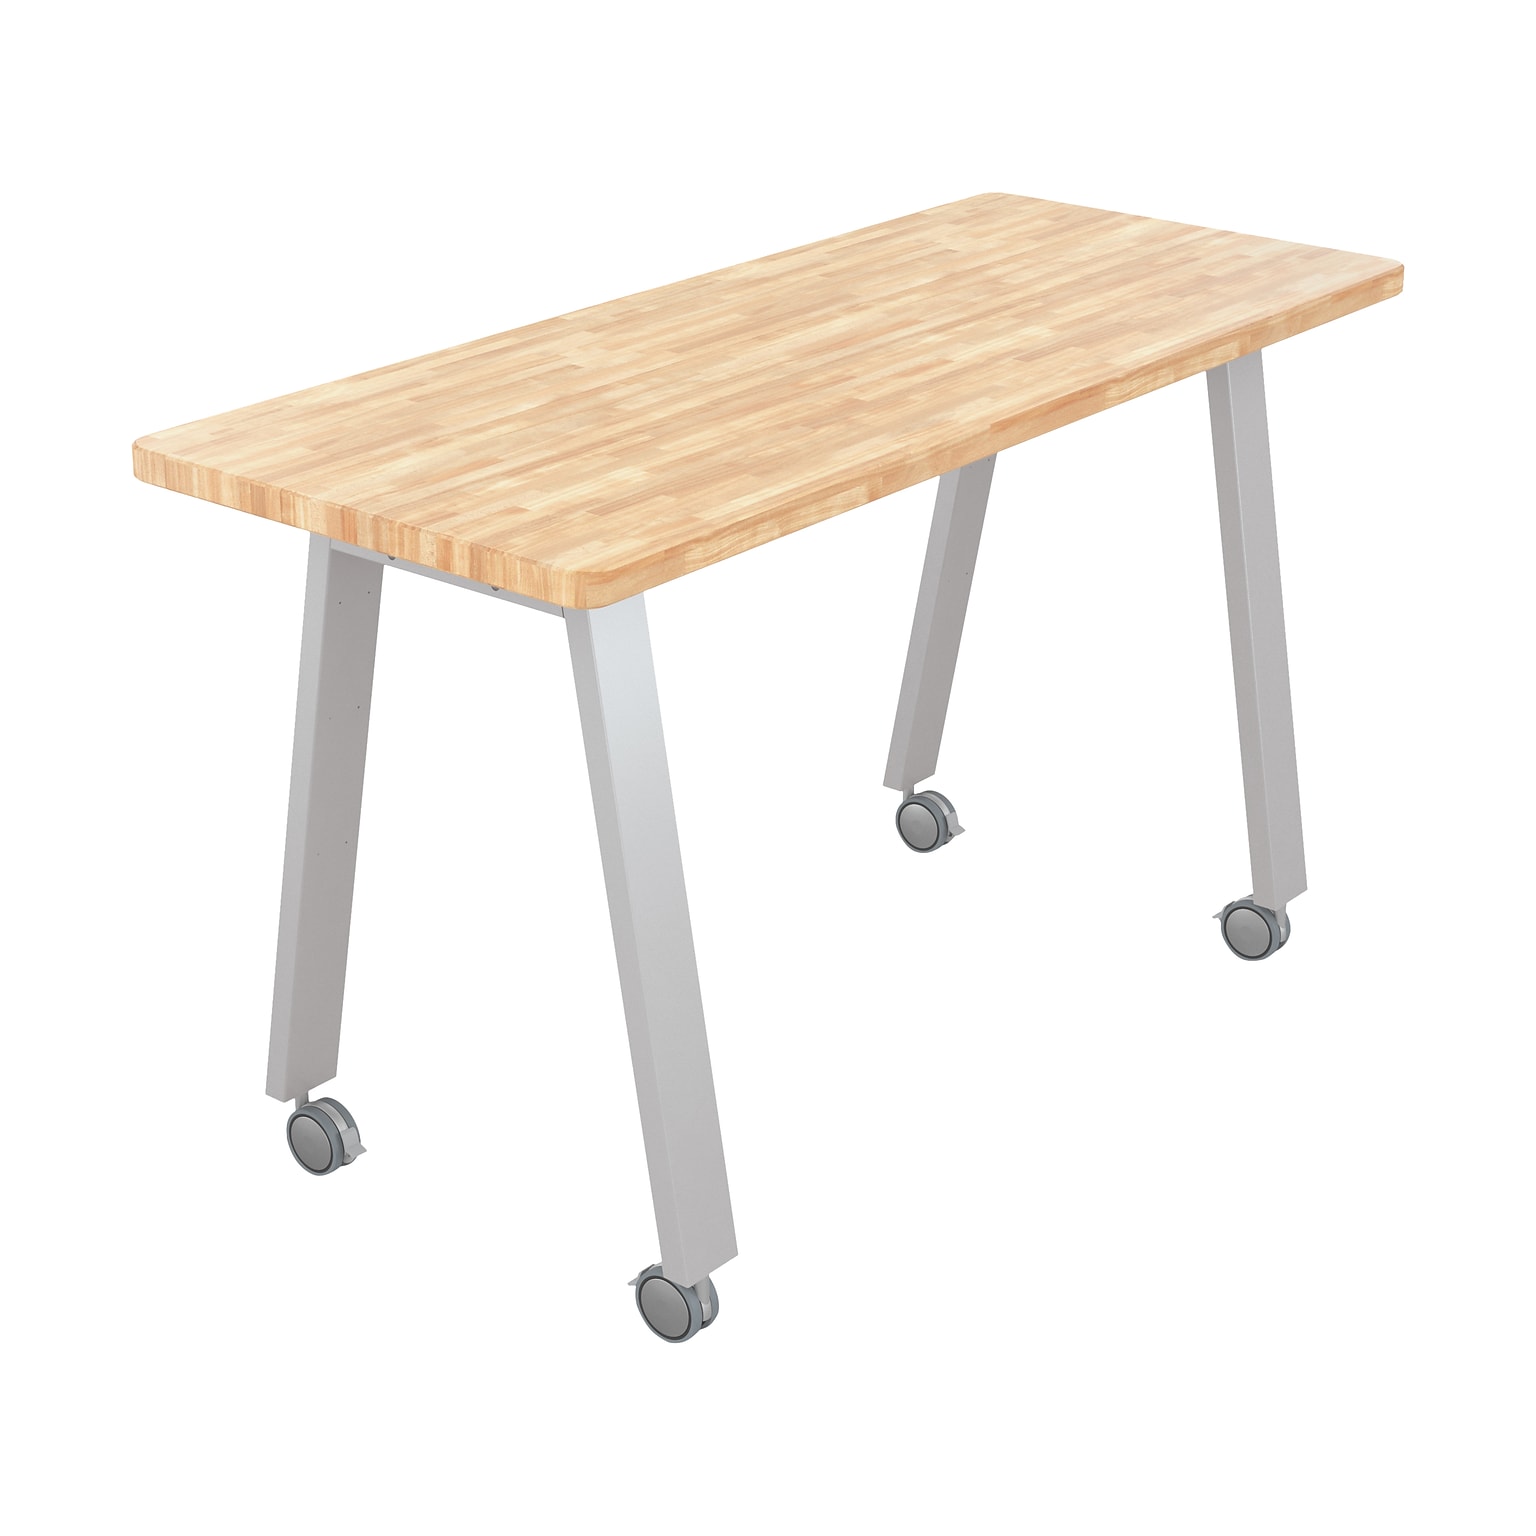 MooreCo Compass Makerspace 72 Table with Butcher Block, Beige/Platinum (91696-B-BUTCHER)